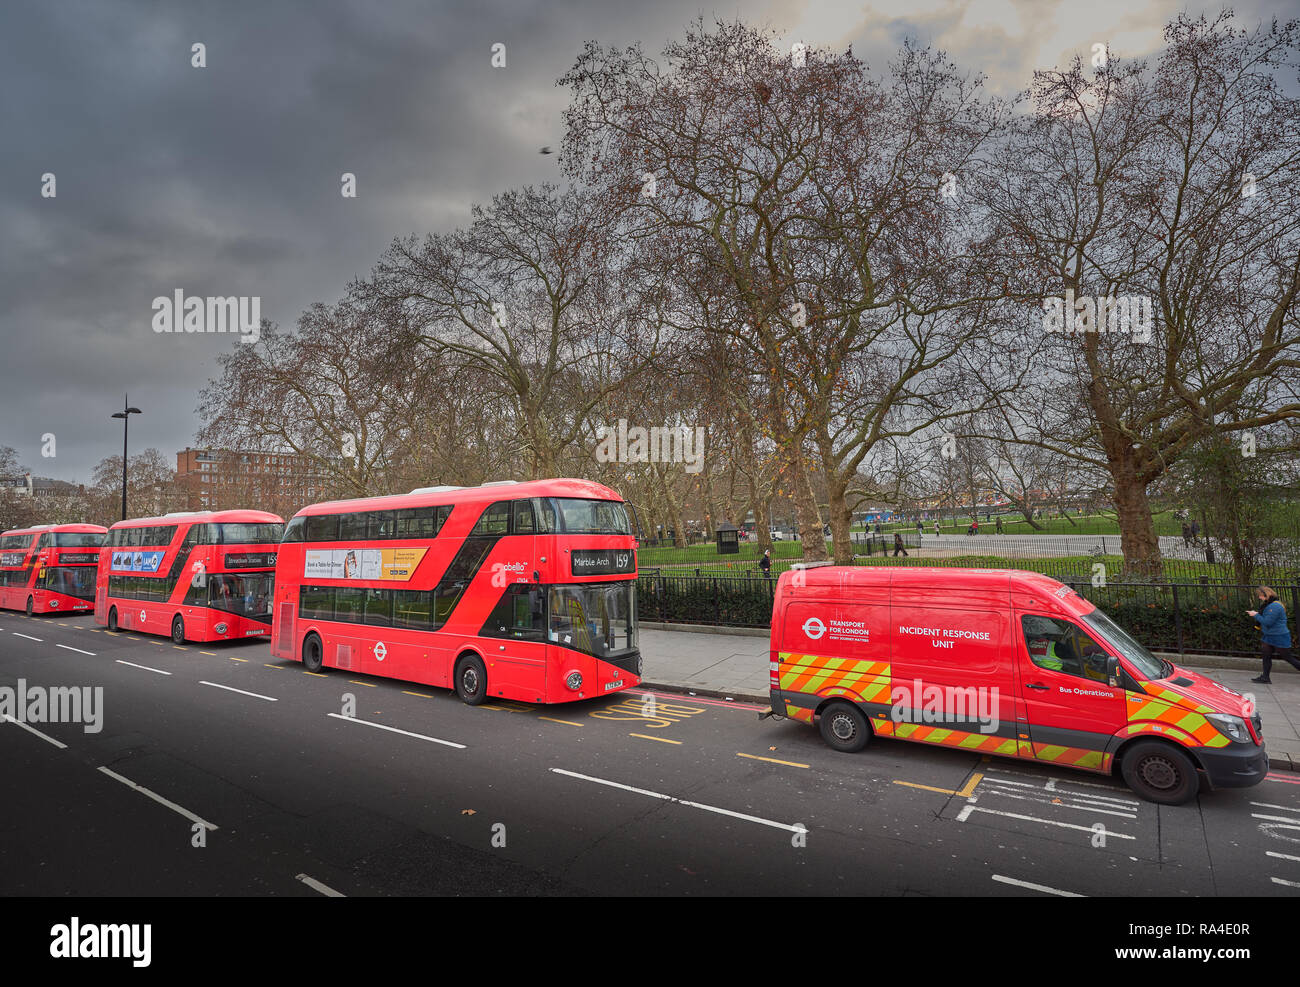 Incidence response van in front of trio of parked red double decker buses on Park Lane outside Hyde Park, London, England. Stock Photo